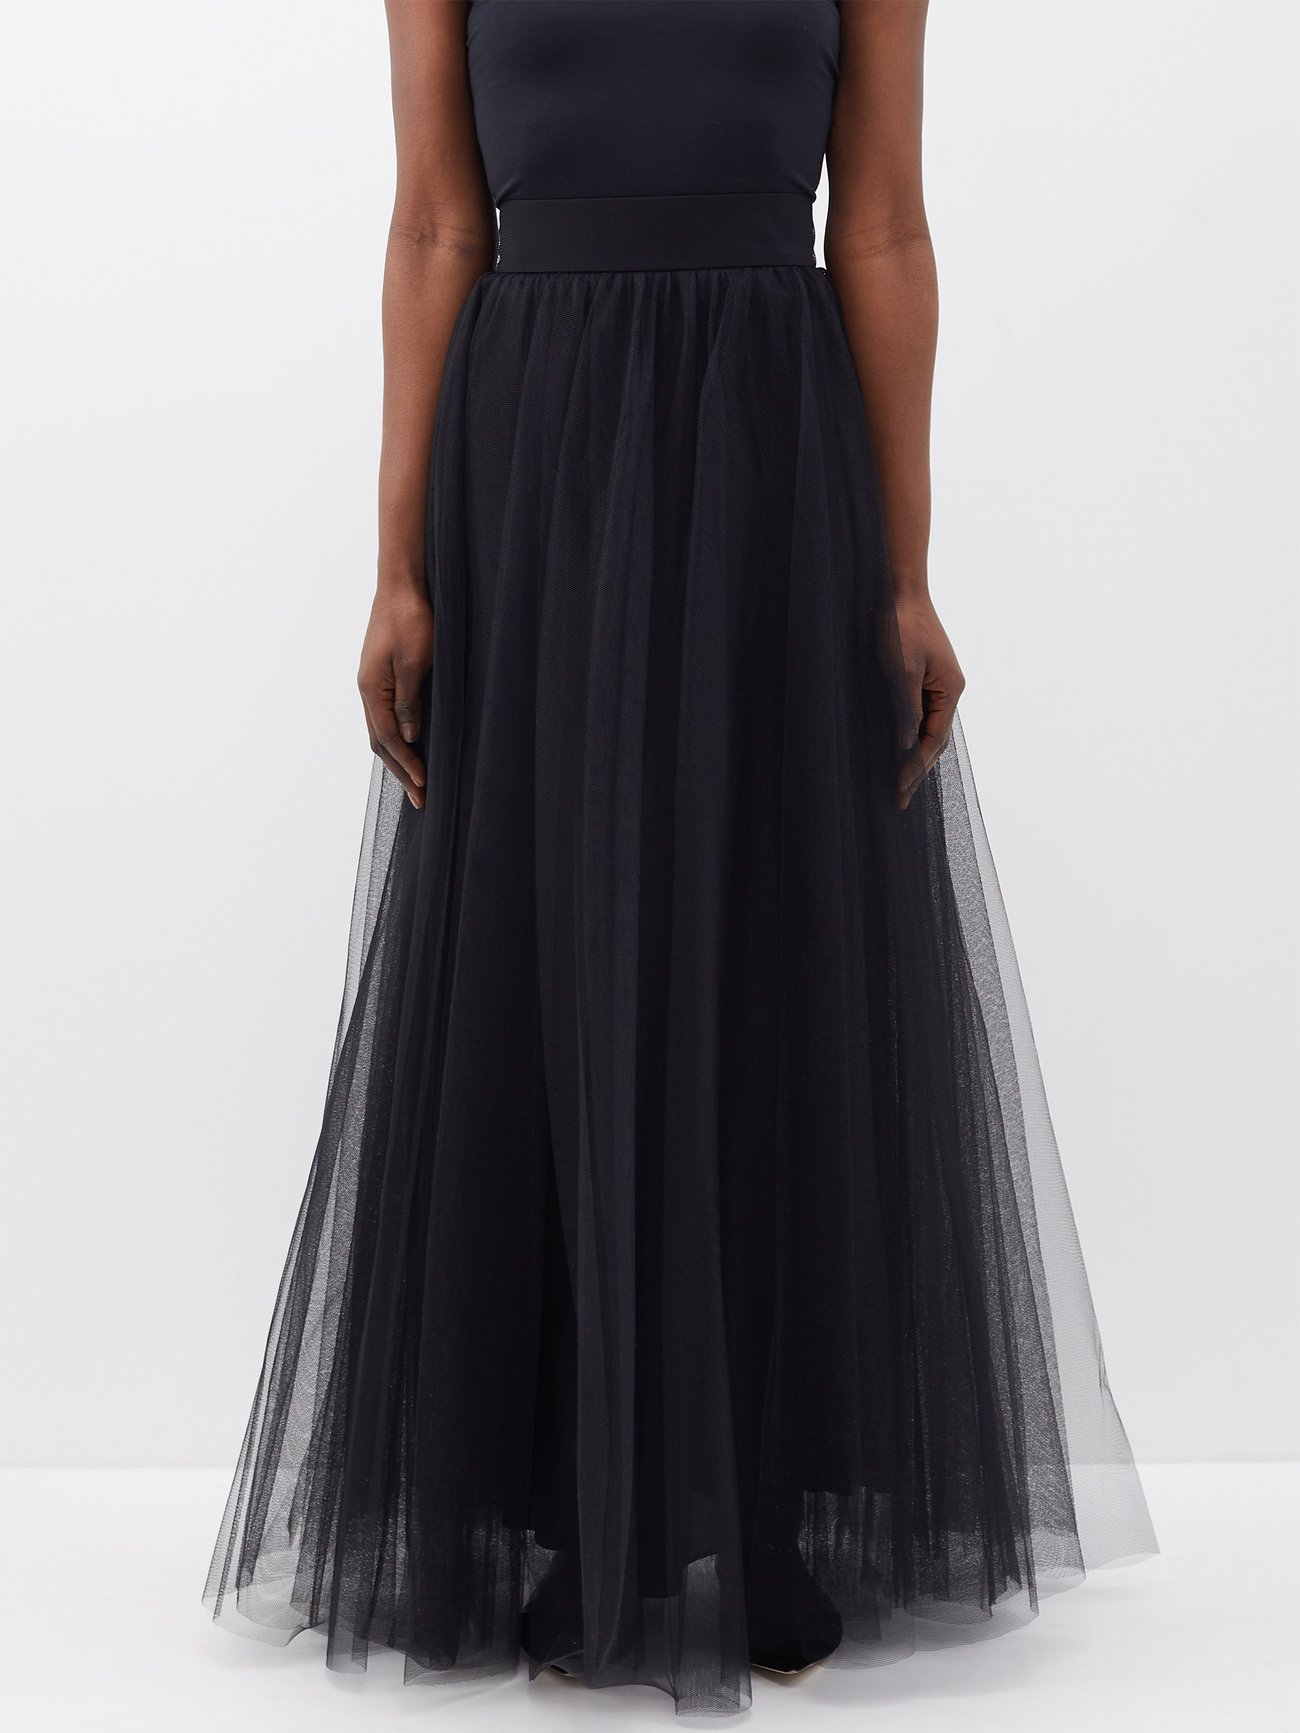 Long Maxi Tulle Skirt 40 Inches- Black | escapeauthority.com